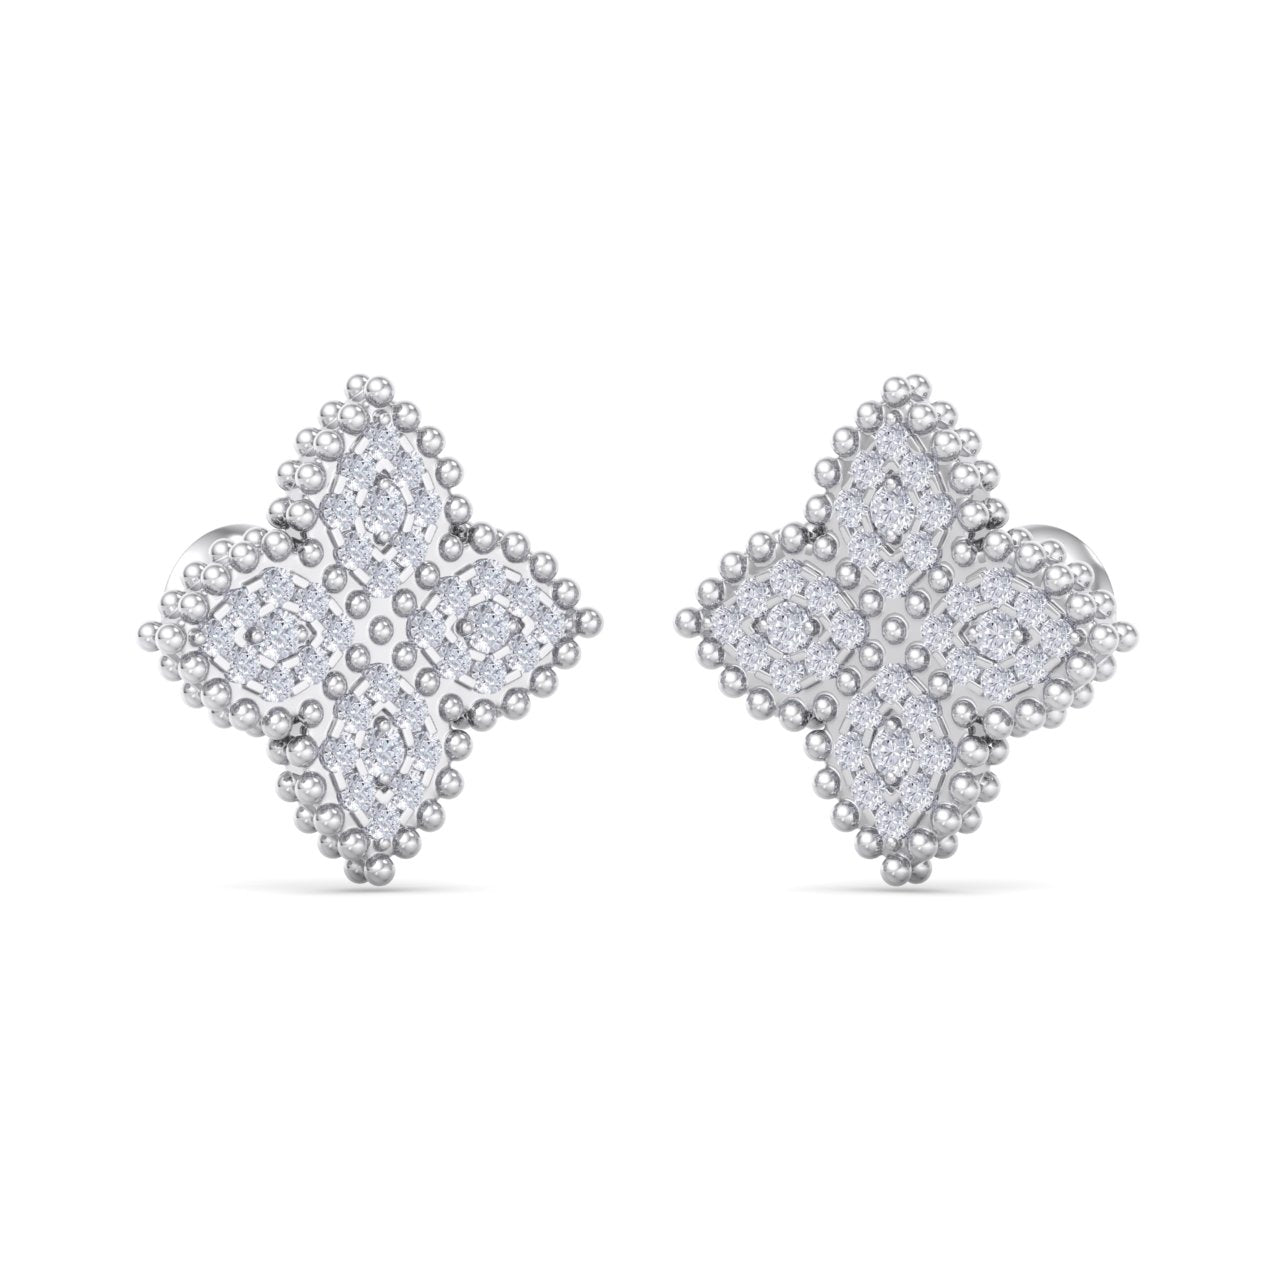 Stud earrings in white gold with white diamonds of 0.38 ct in weight